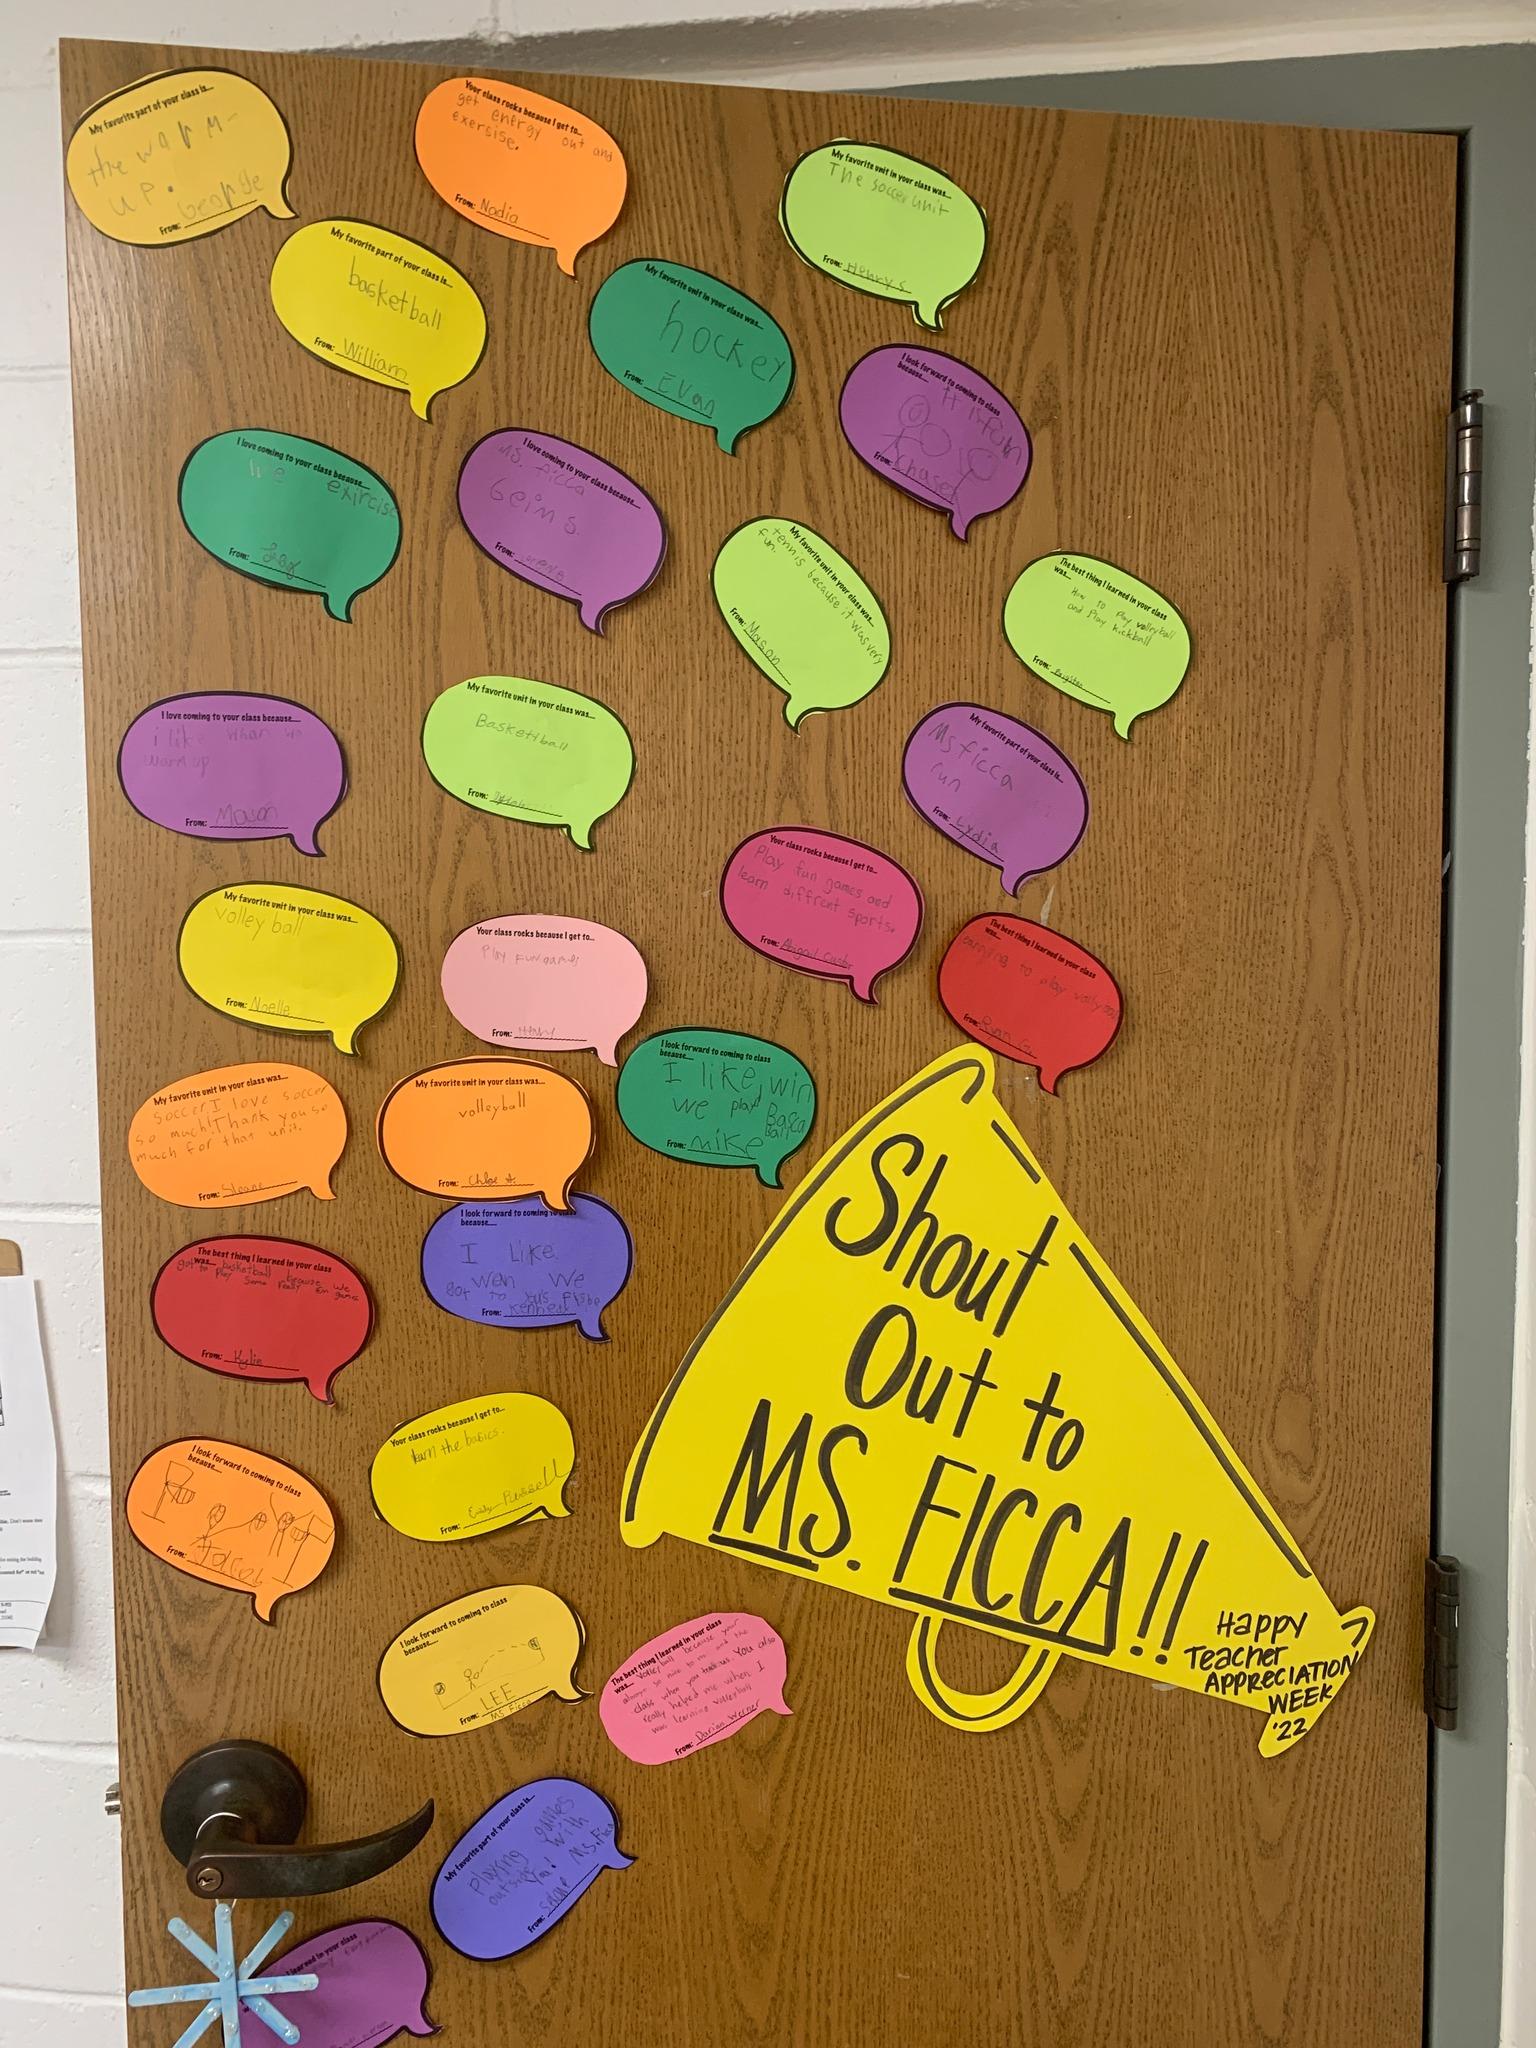 hand made teacher shout out notes by students and parents